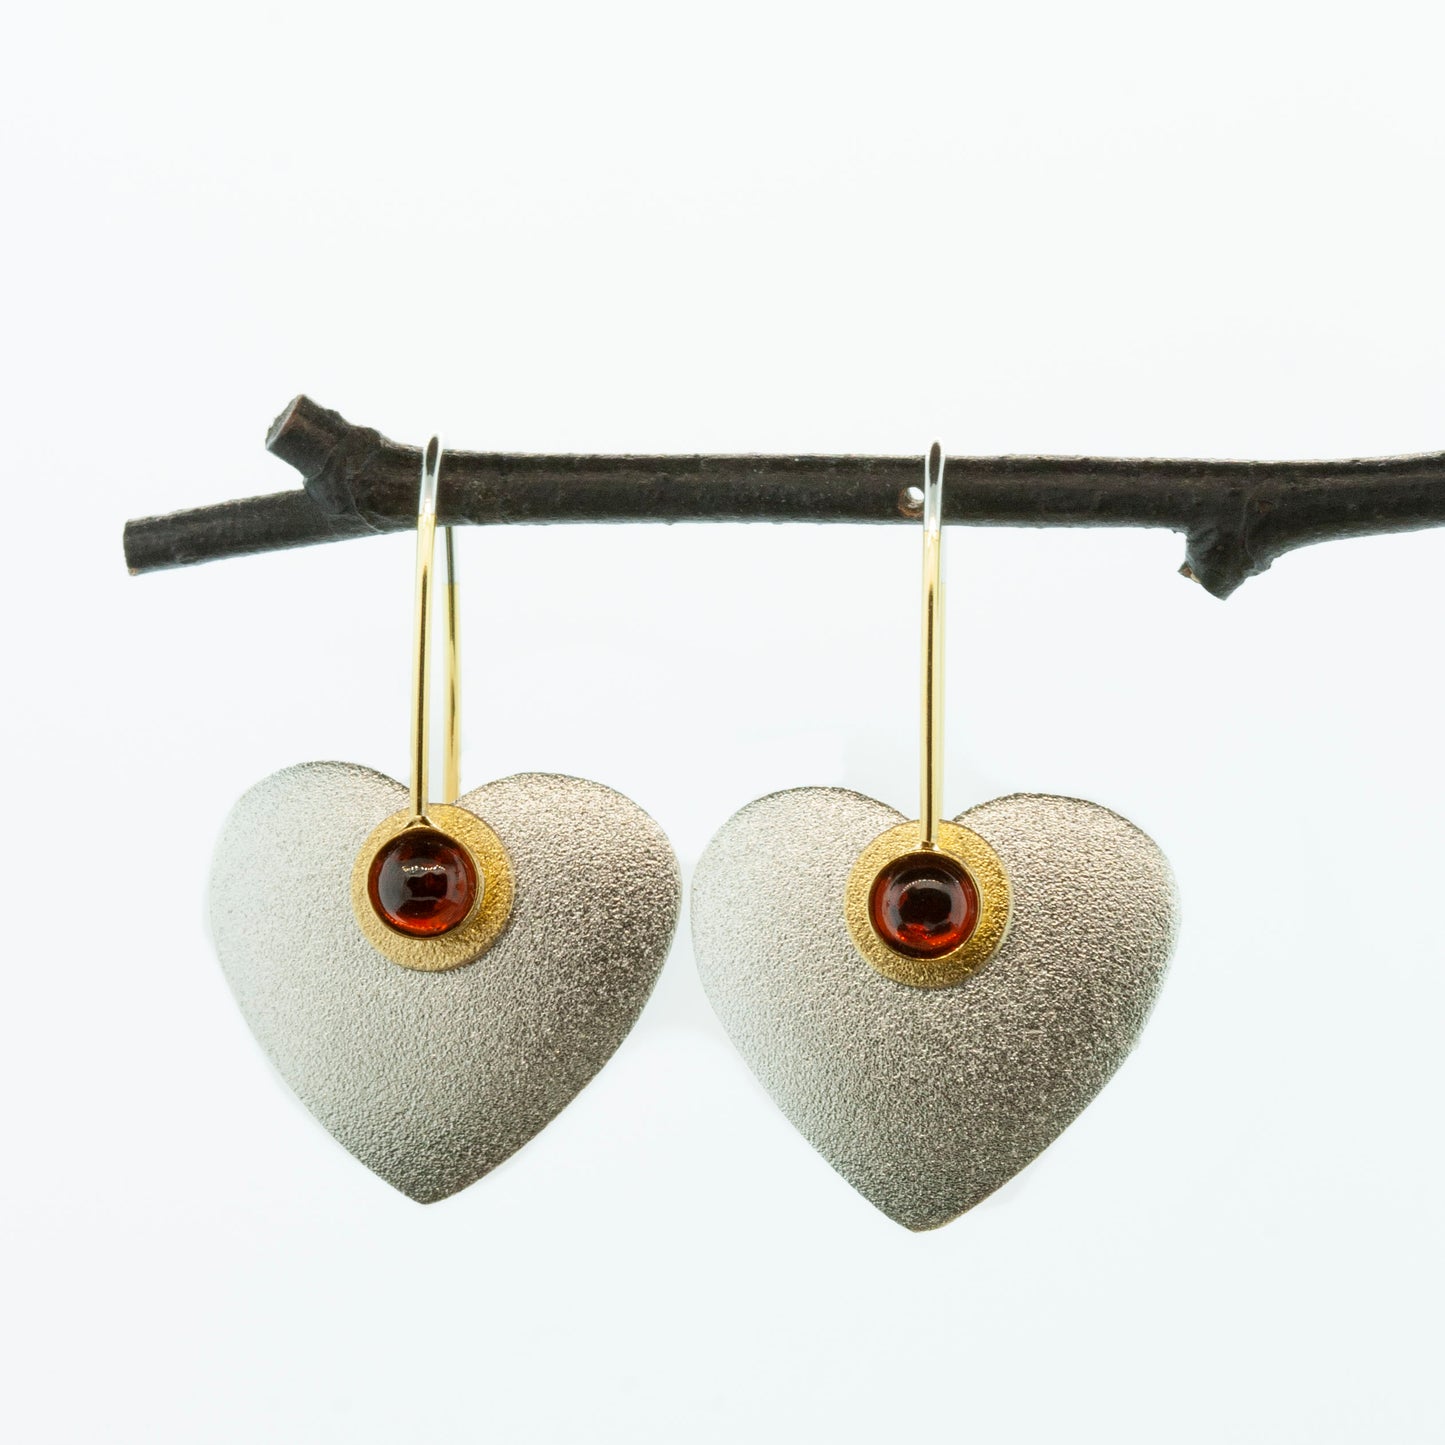 Small Heart Earrings-Donation to Domestic Violence Services